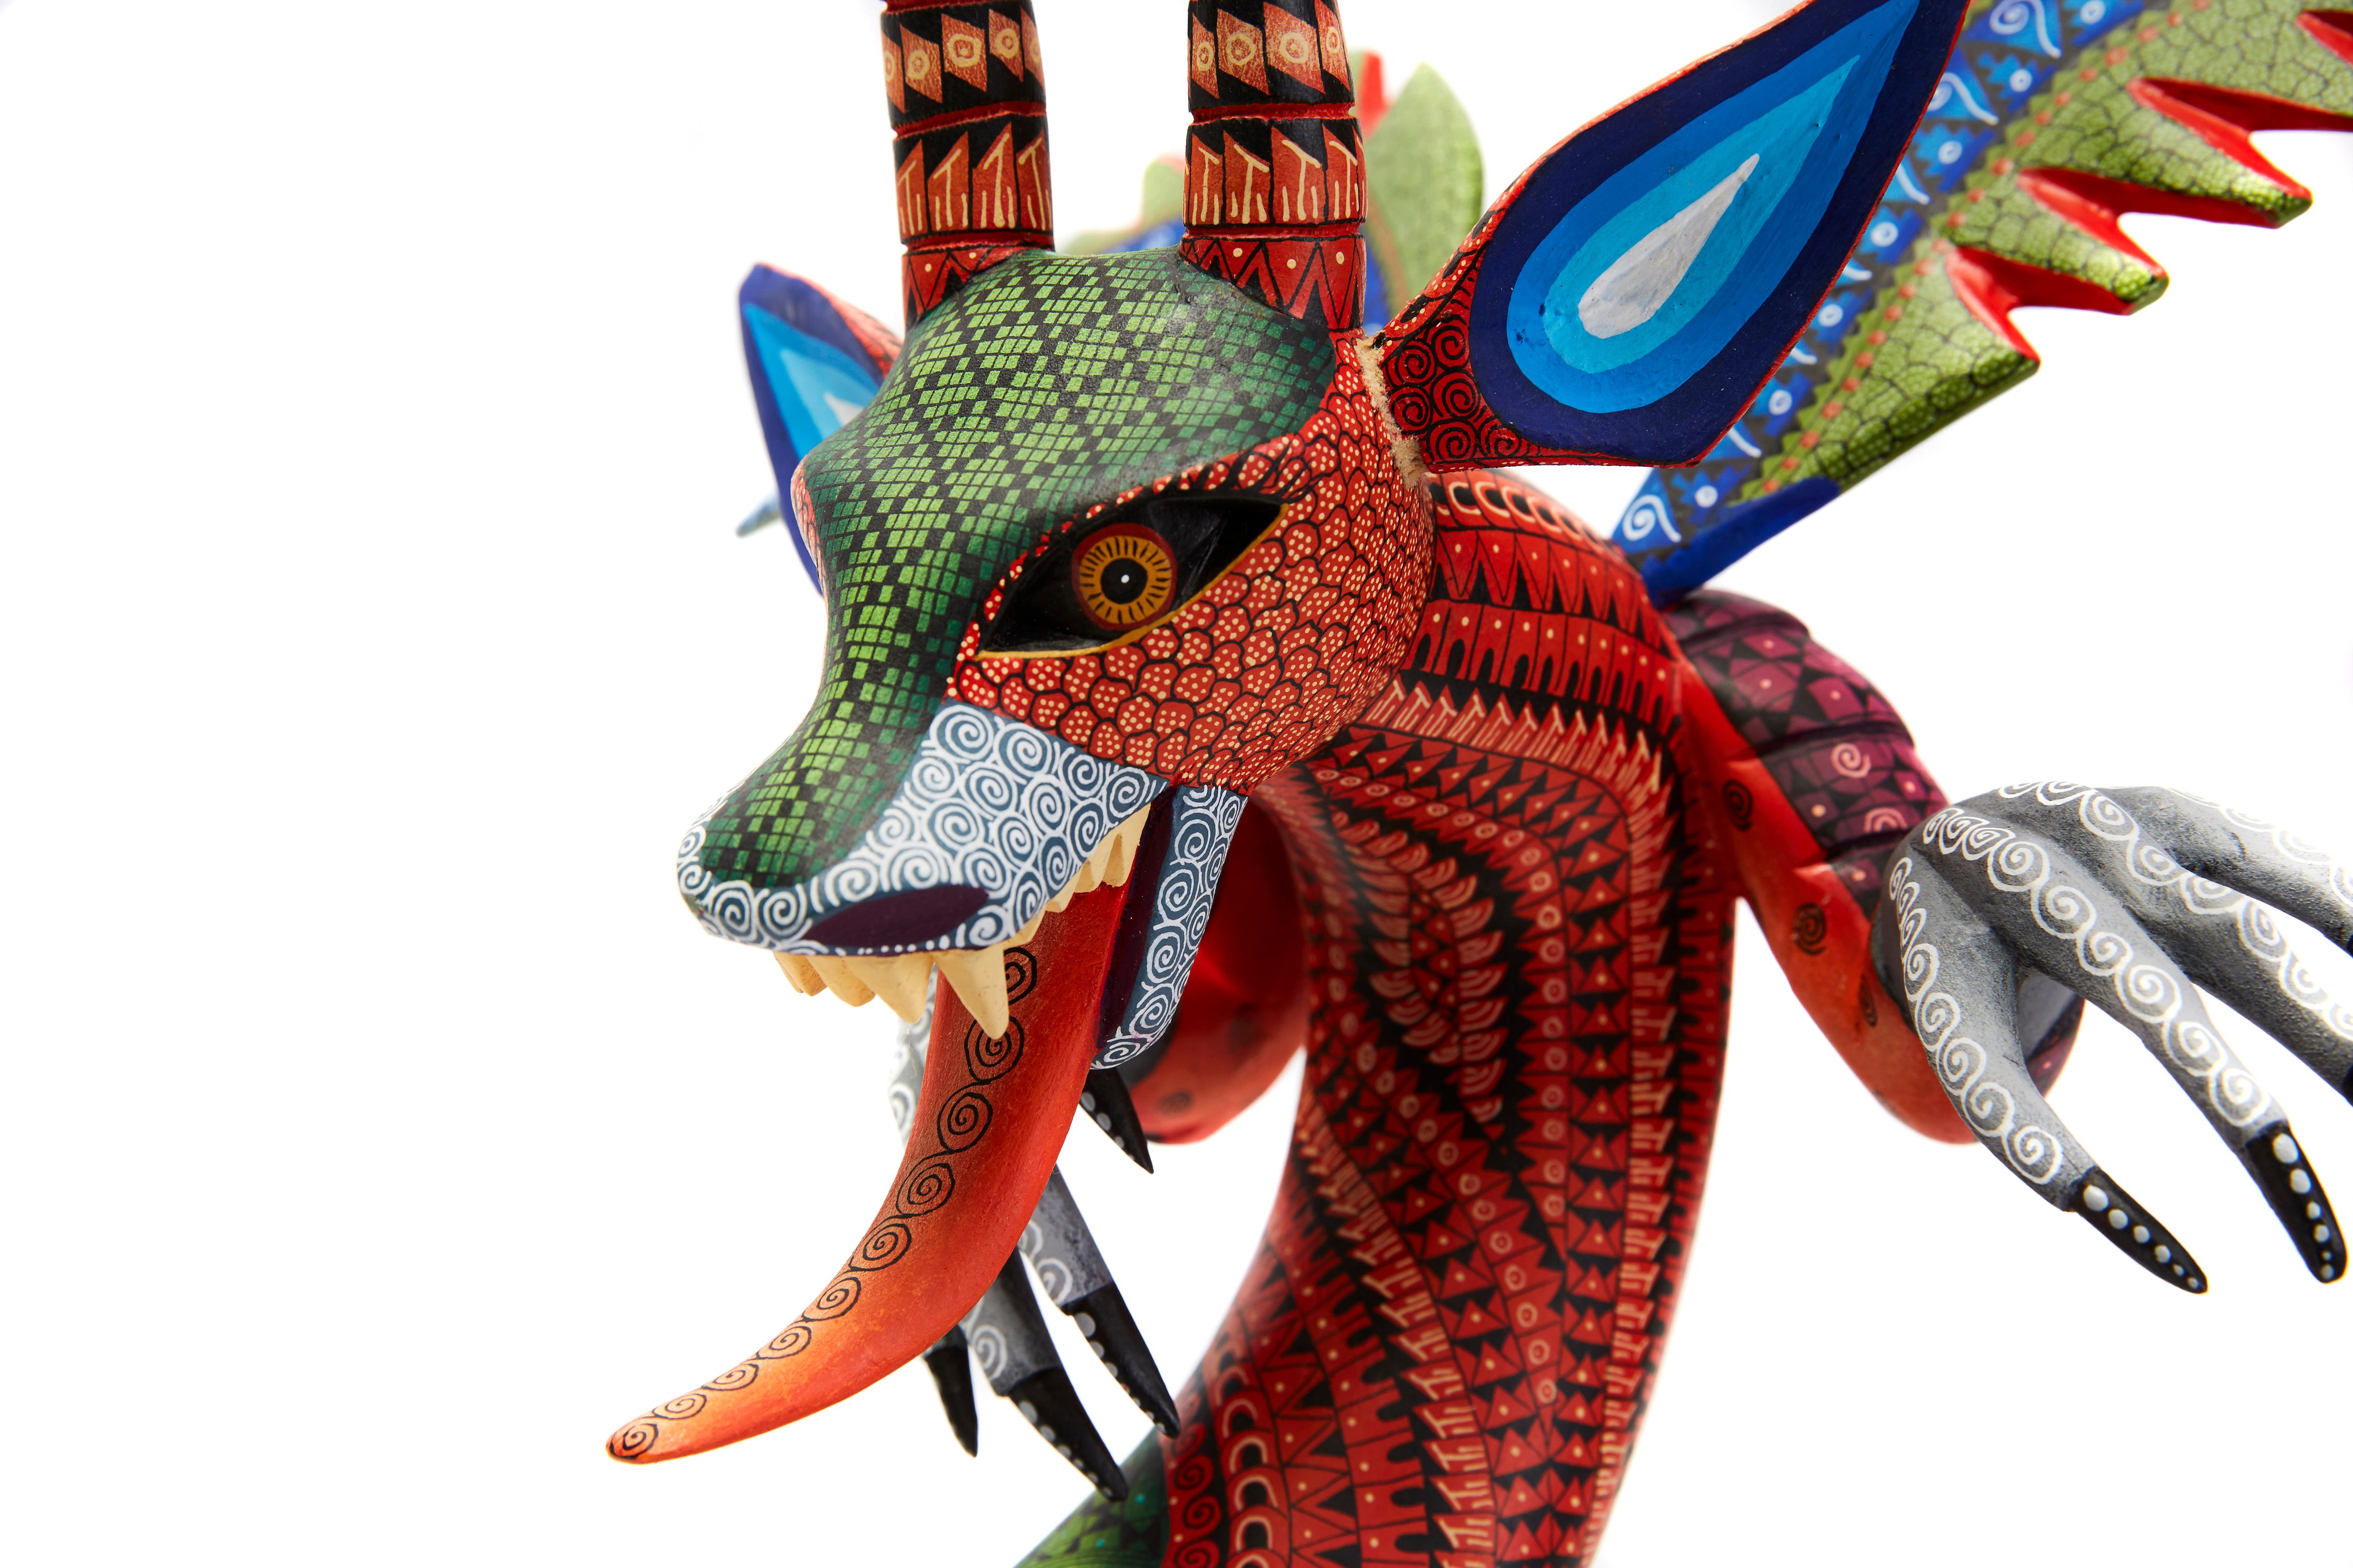 Dragon Fantastico - Fantastic Dragon Alebrije

This Mexican Fantastic Dragon Alebrije made with Copal wood, wood carving technique gouges, machete and sandpaper, decorated with acrylic paintings with Zapotec symbols.
At Cactus Fine Art, we offer an